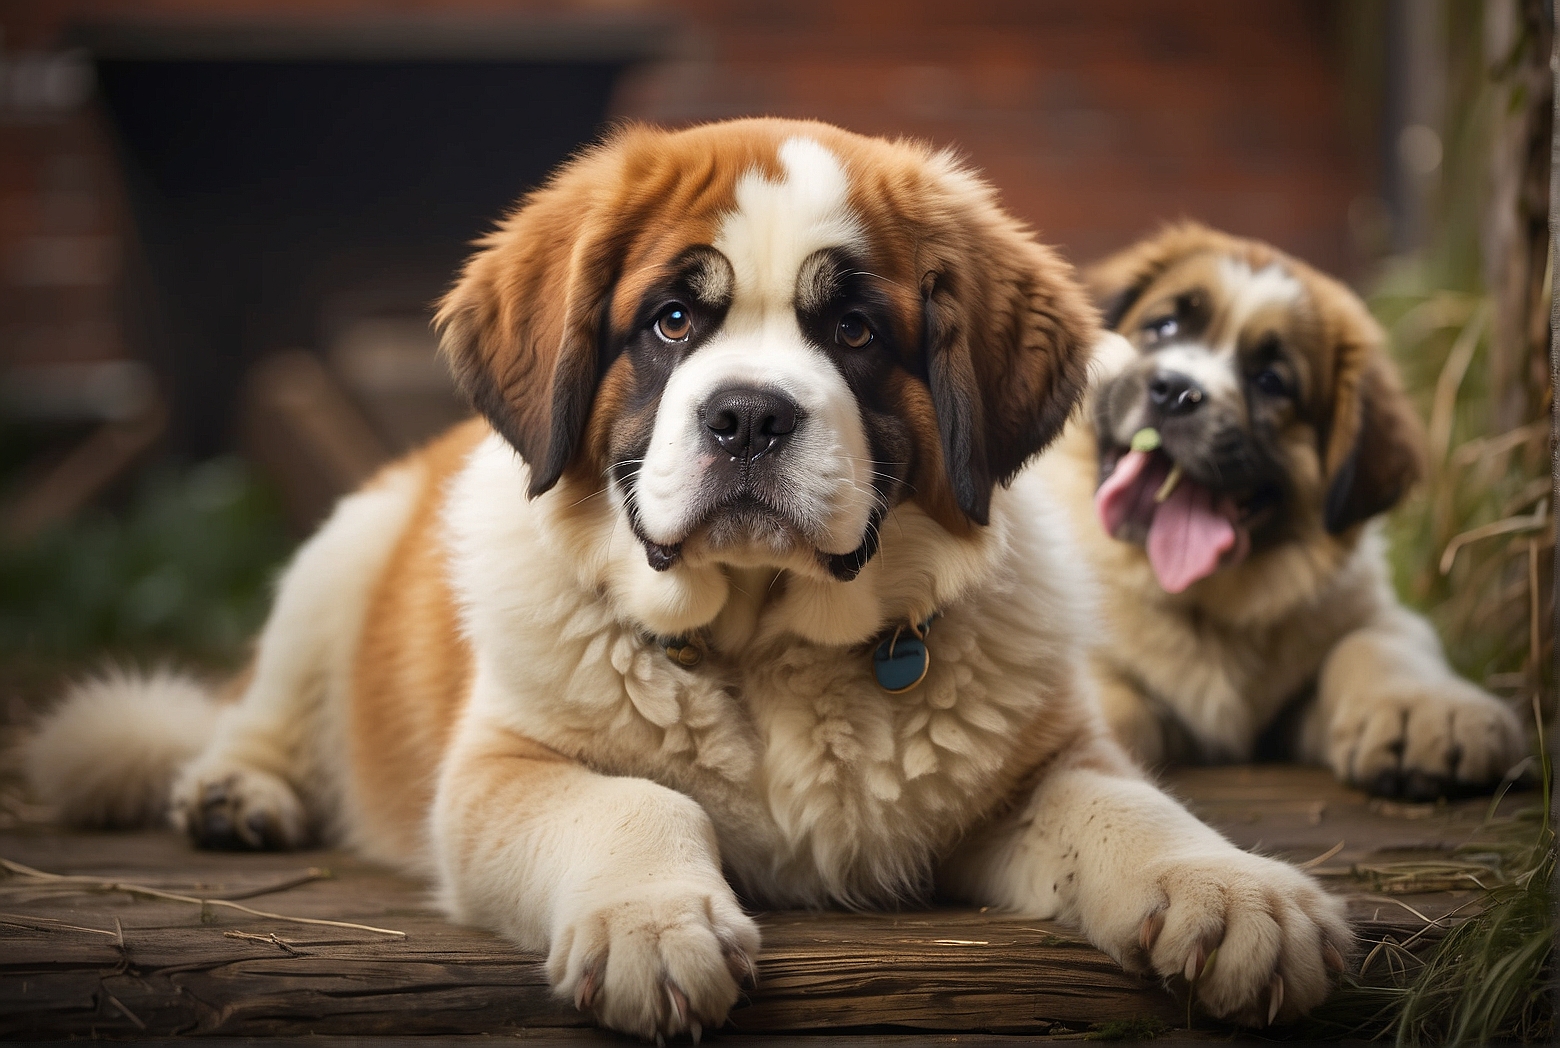 How Many Different Saint Bernard Breeds Are There?